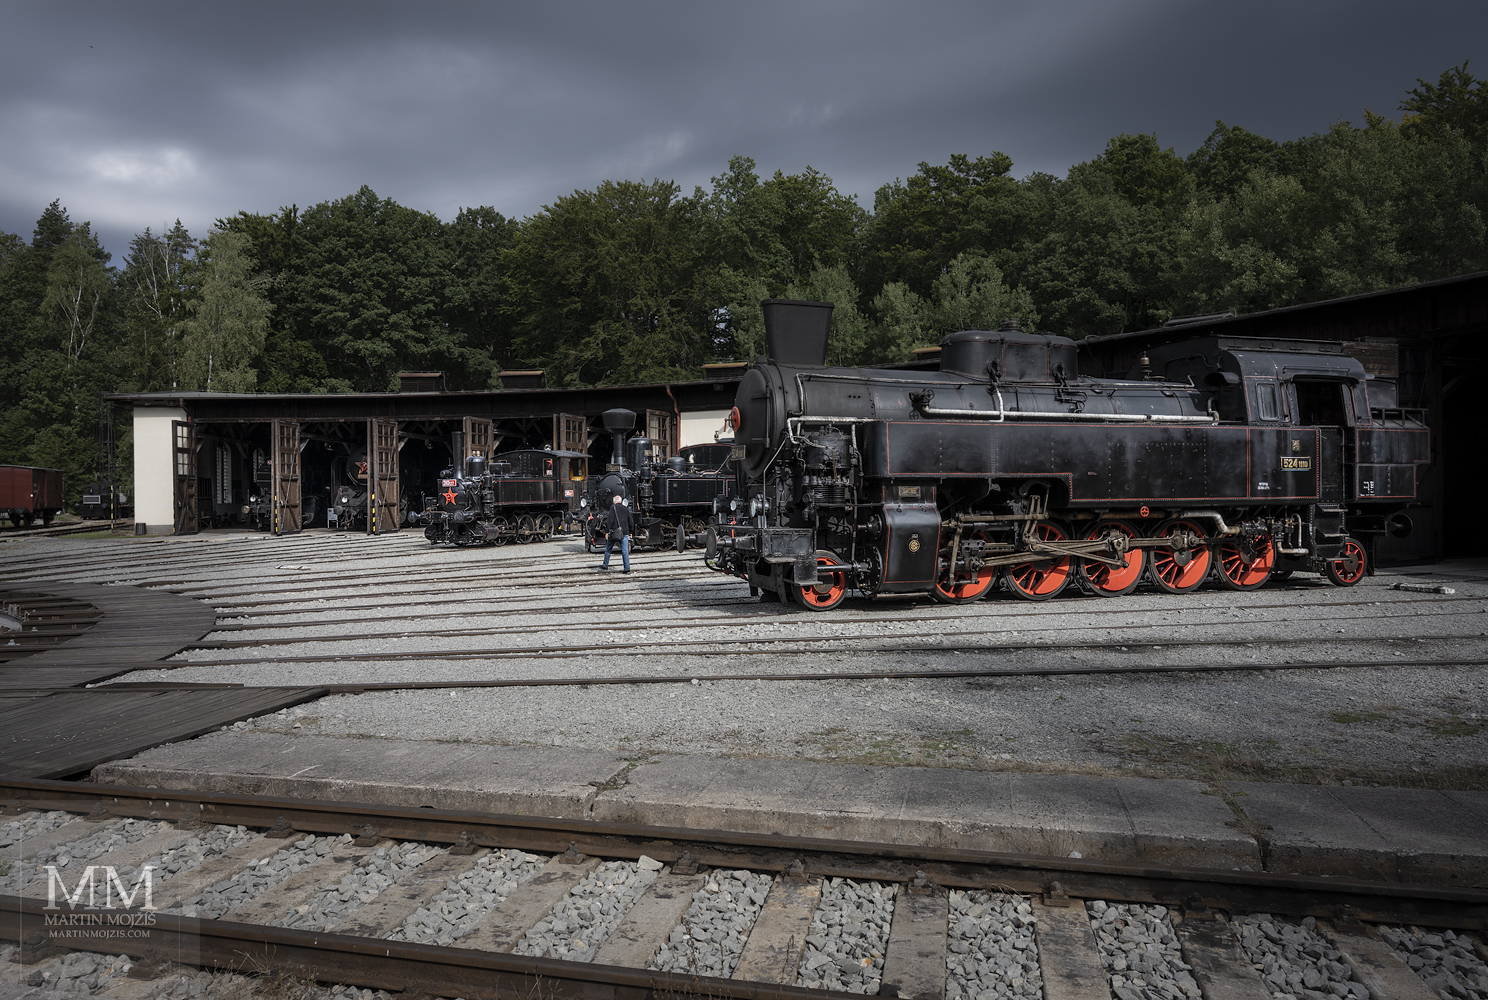 Steam locomotive 524.1110 in front of the roundhouse.